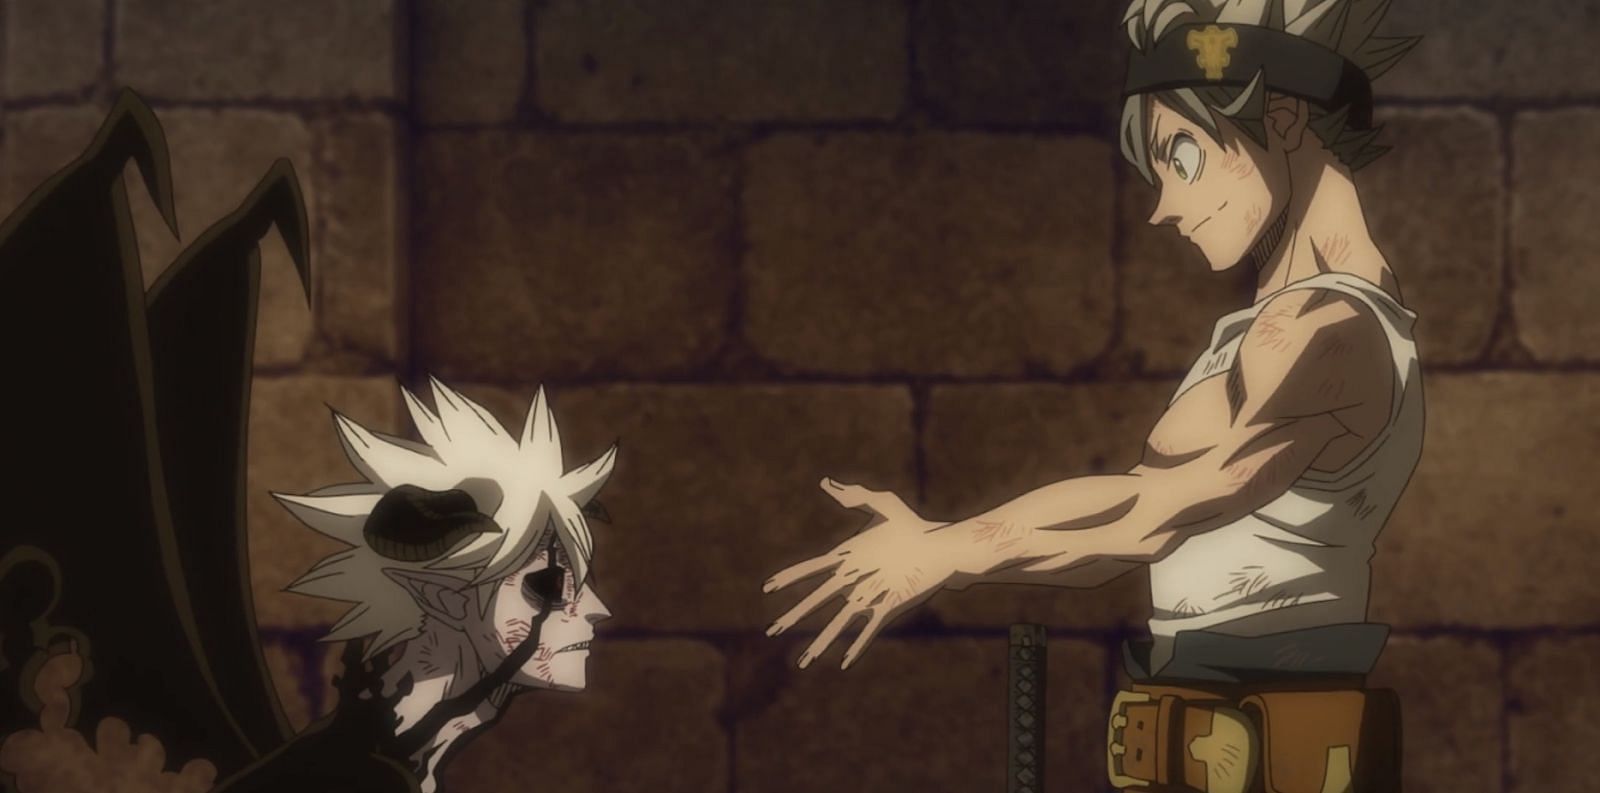 Black Clover season 5: Expected release window, what to expect